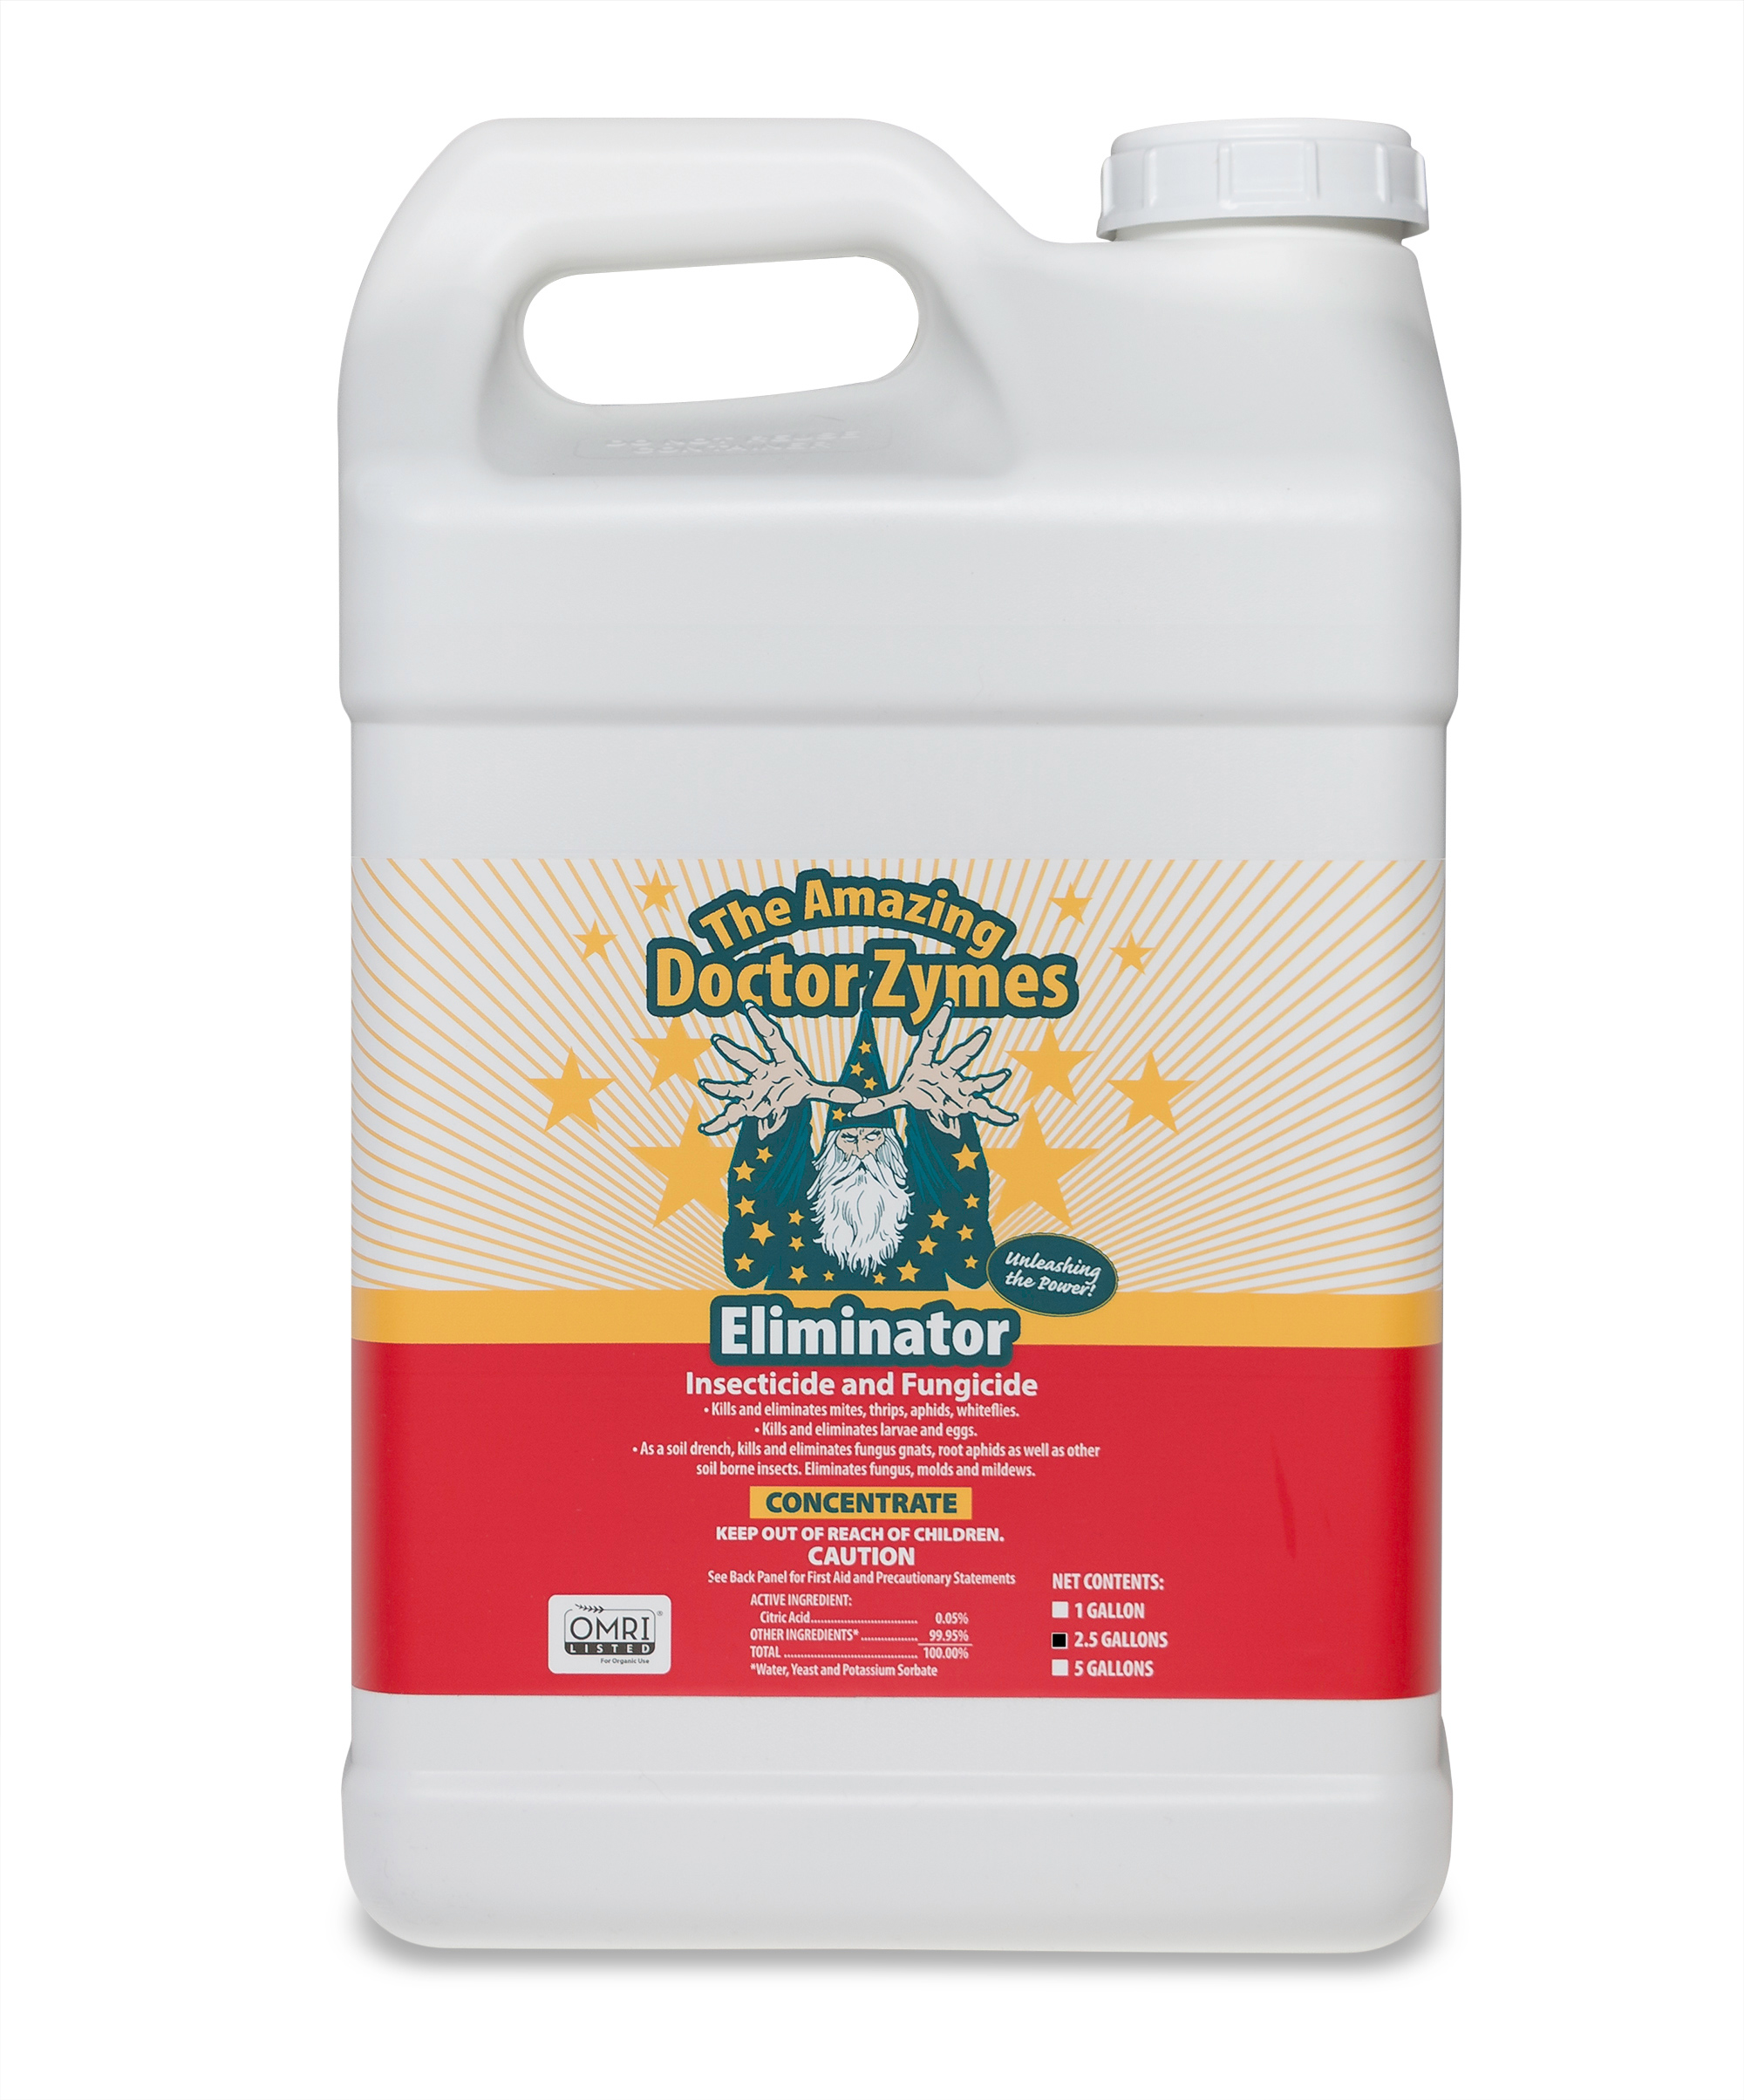 Picture for The Amazing Doctor Zymes Eliminator Concentrate, 2.5 gal